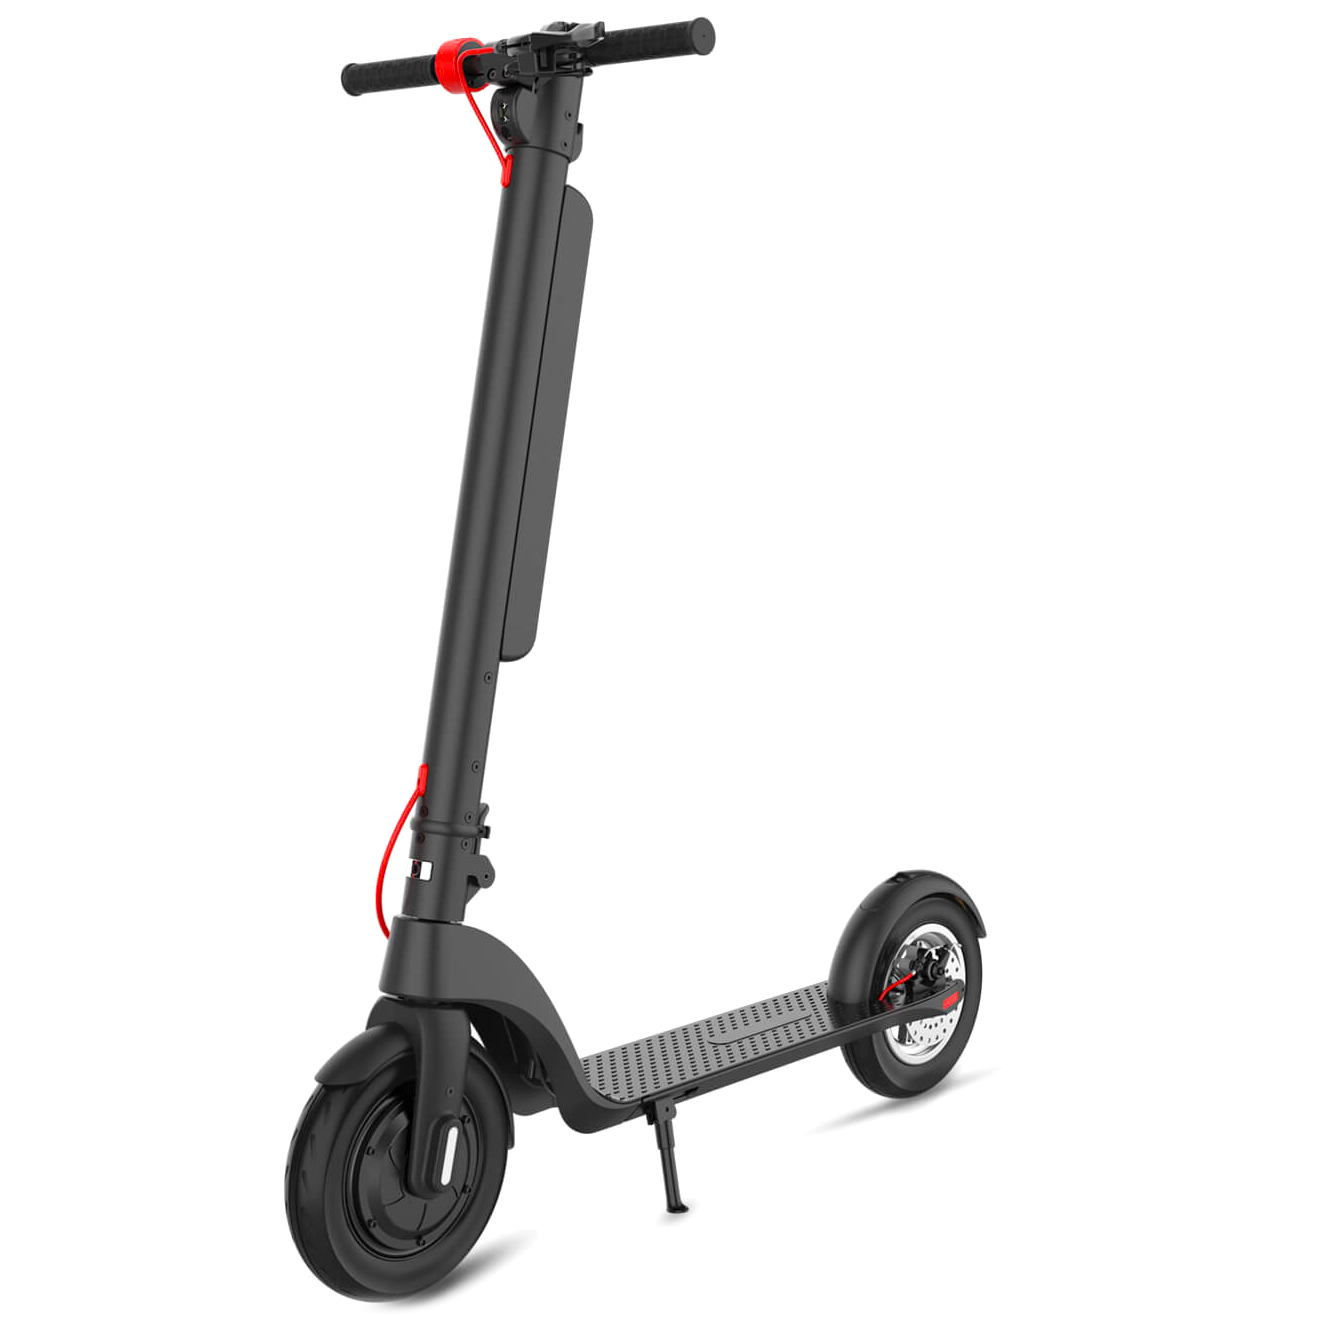 A Turboant X7 Pro electric scooter standing upright.